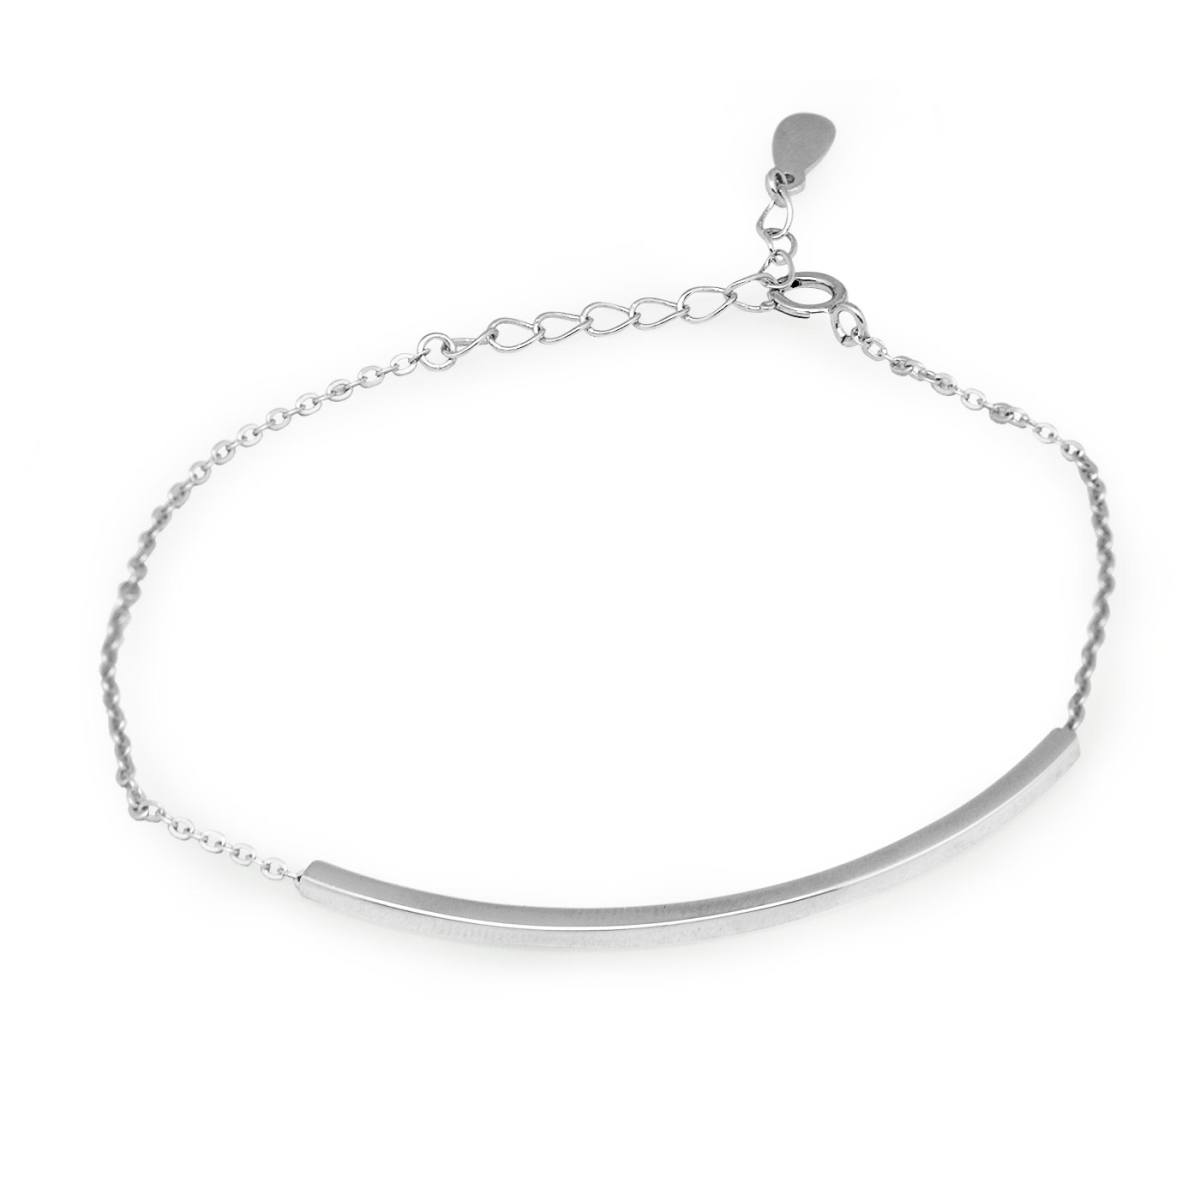 Hfh-520152596656 Fashion Silver 18k White Gold Solid 925 Sterling Silver Bracelet For Women